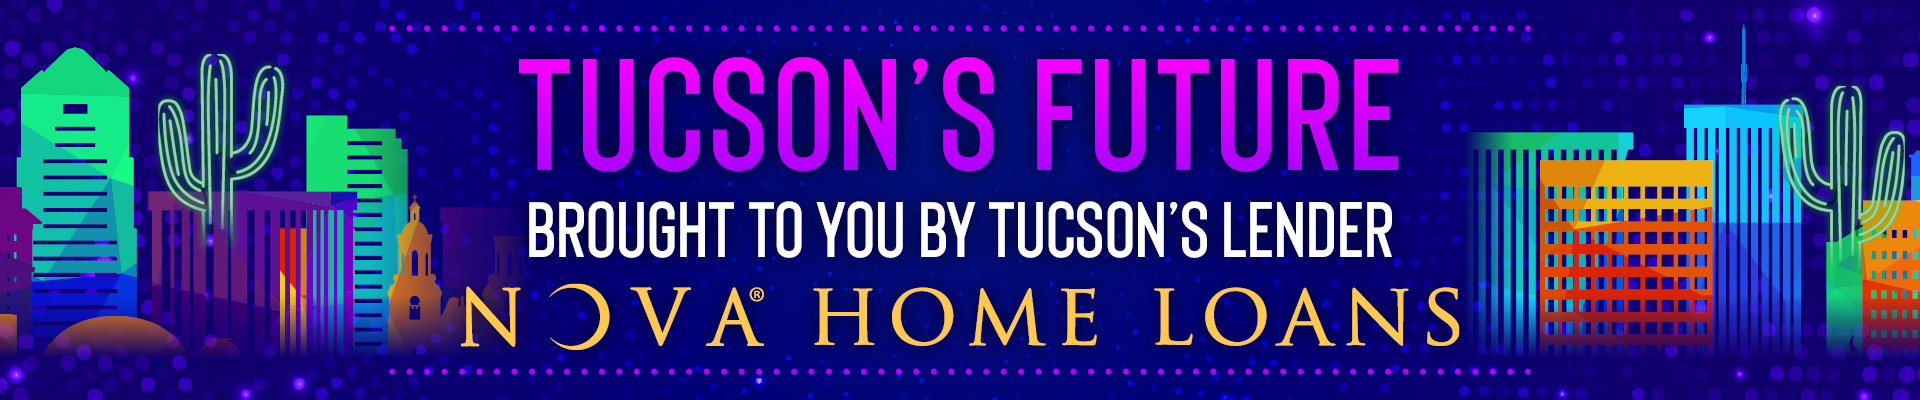 Tucson's Future: Brought To You By Tucson's Lender NOVA Home Loans